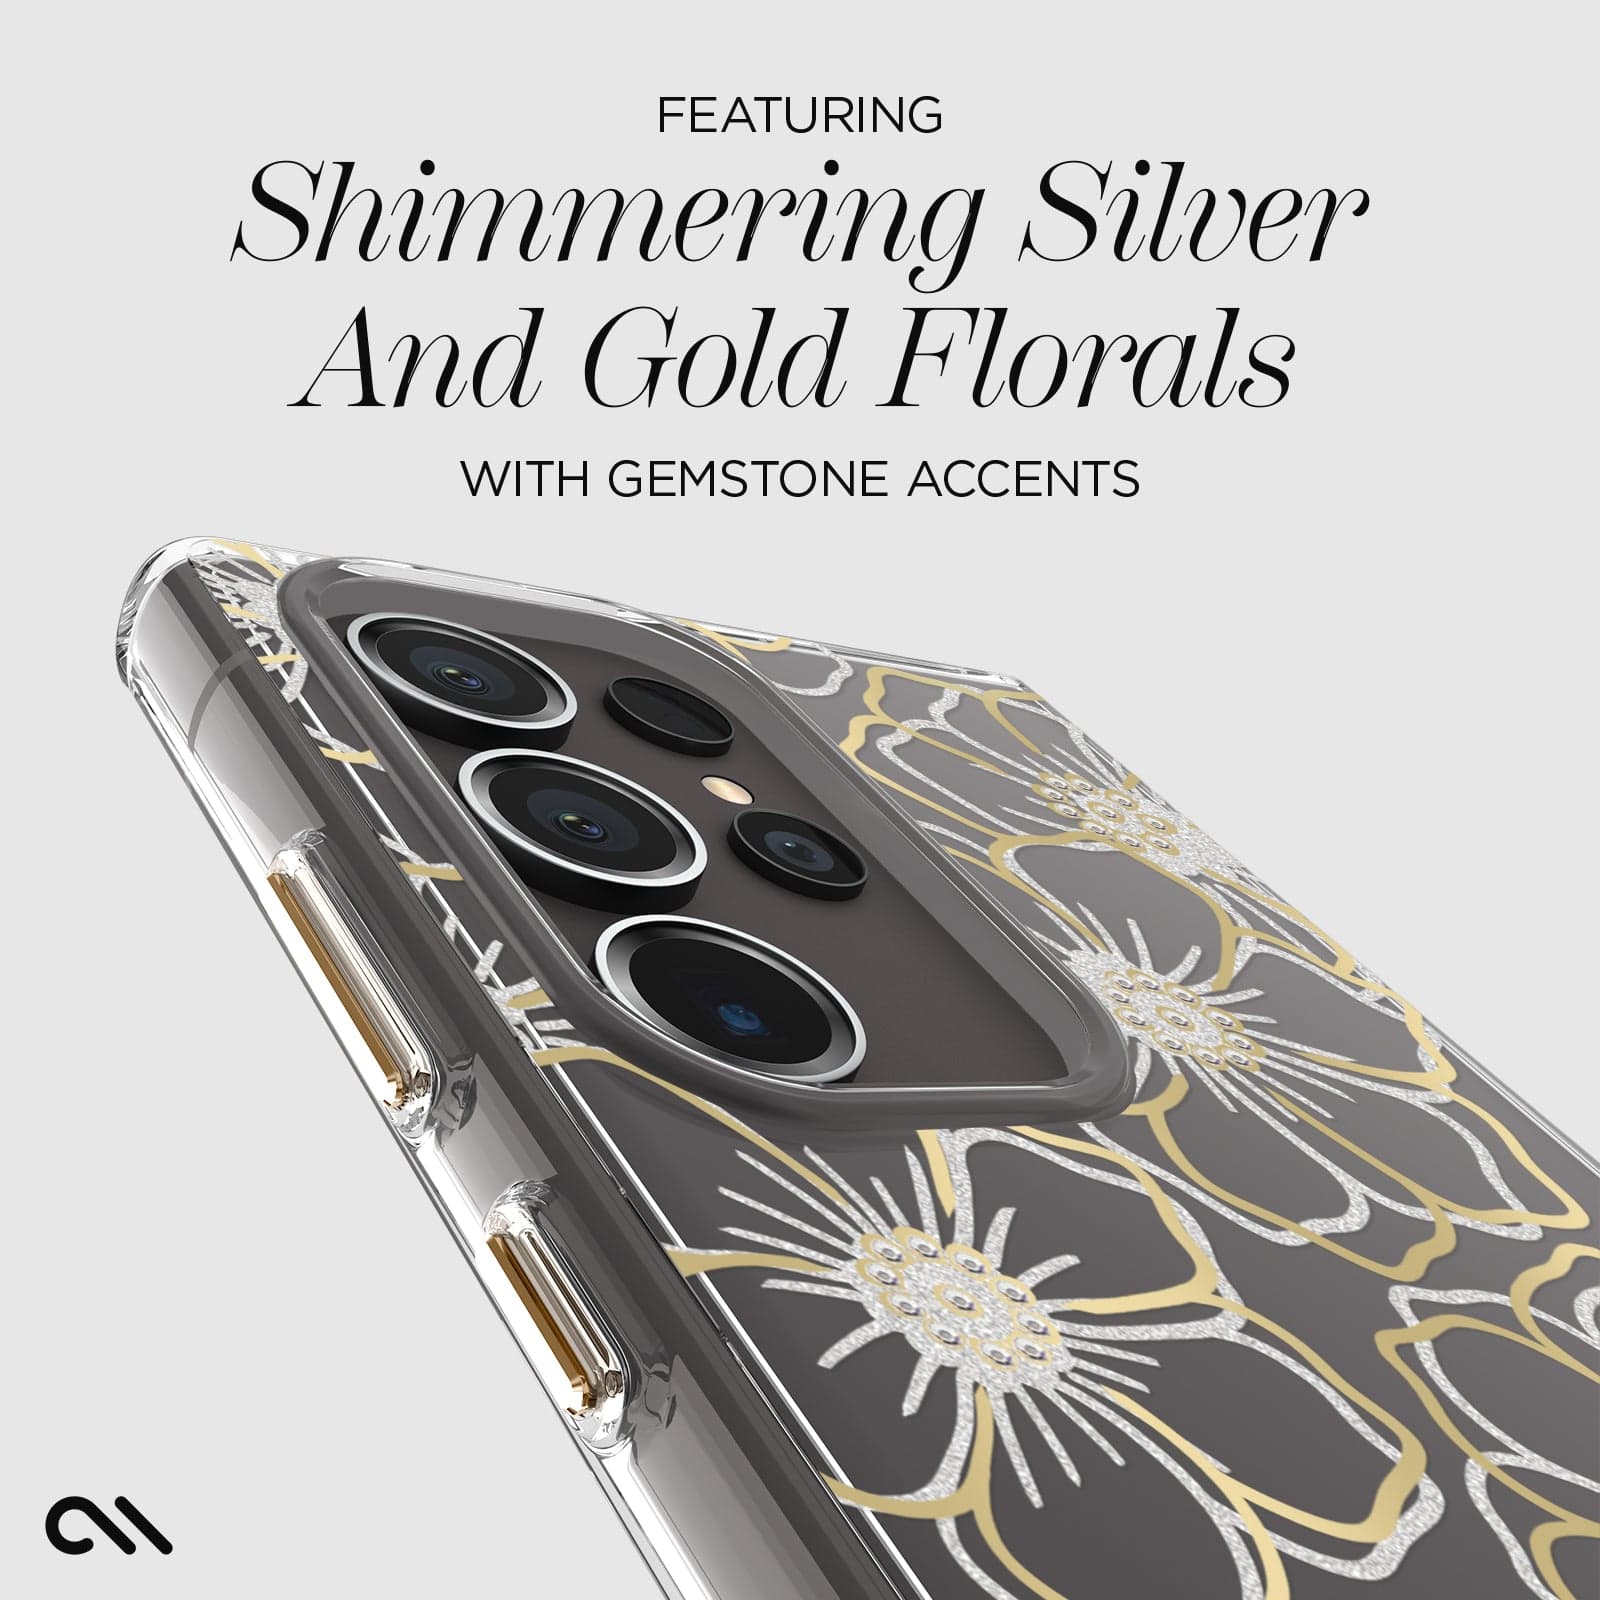 FEATURING SHIMMER SILVER AND GOLD FLORALS WITH GEMSTONE ACCENTS